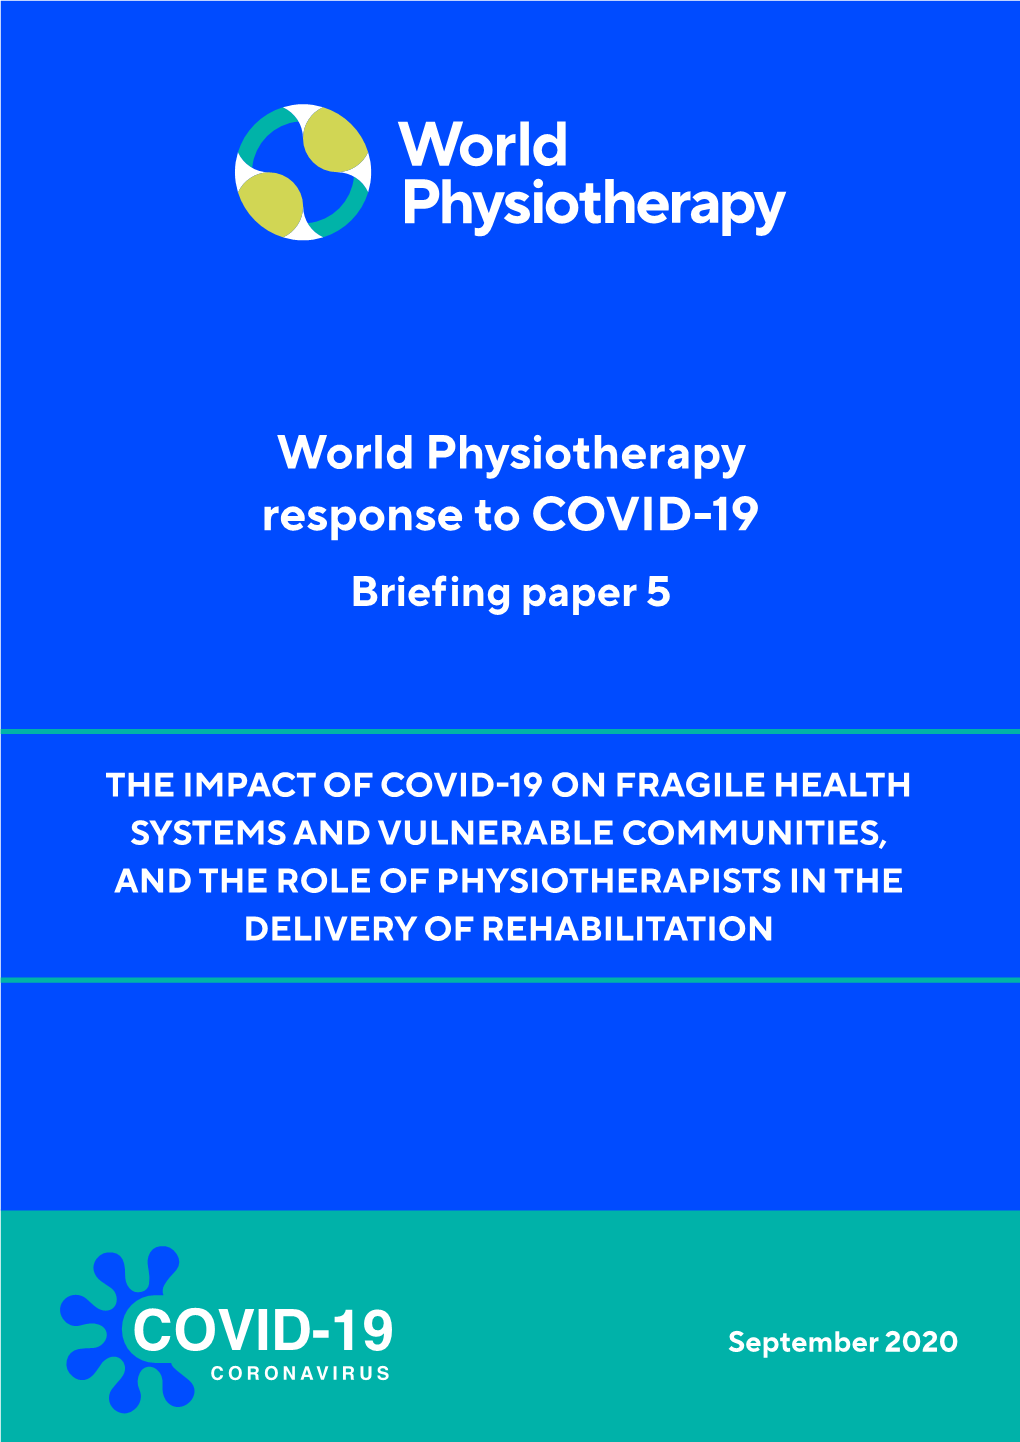 World Physiotherapy Response to COVID-19 Briefing Paper 5